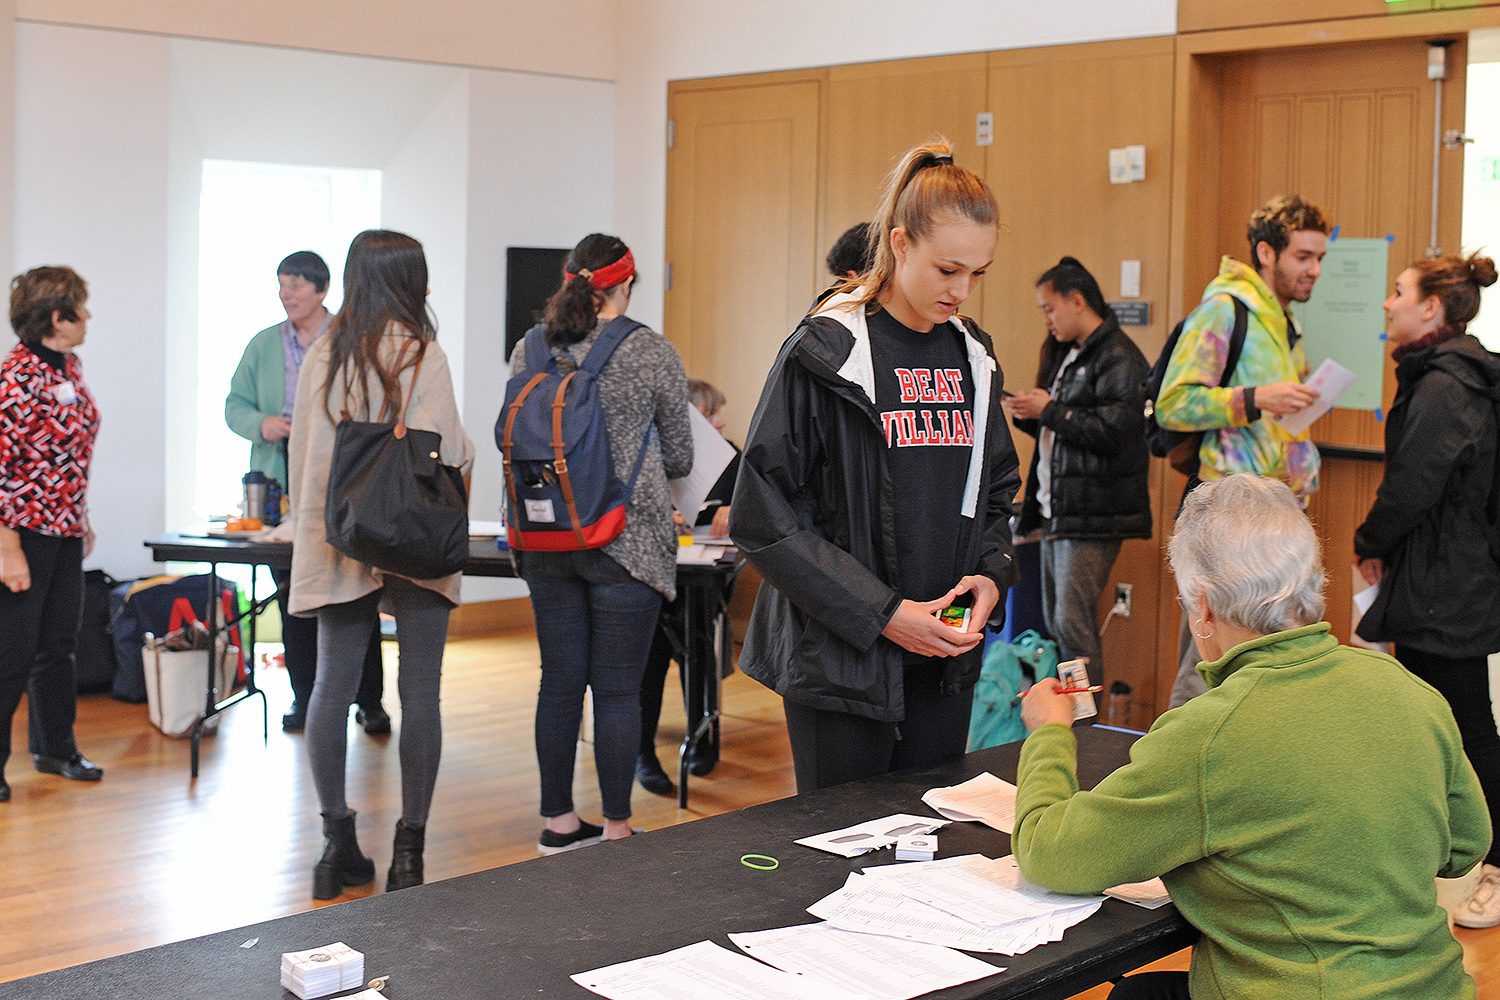 Voting for the Primary Election in Beckham Hall, April 26, 2016.